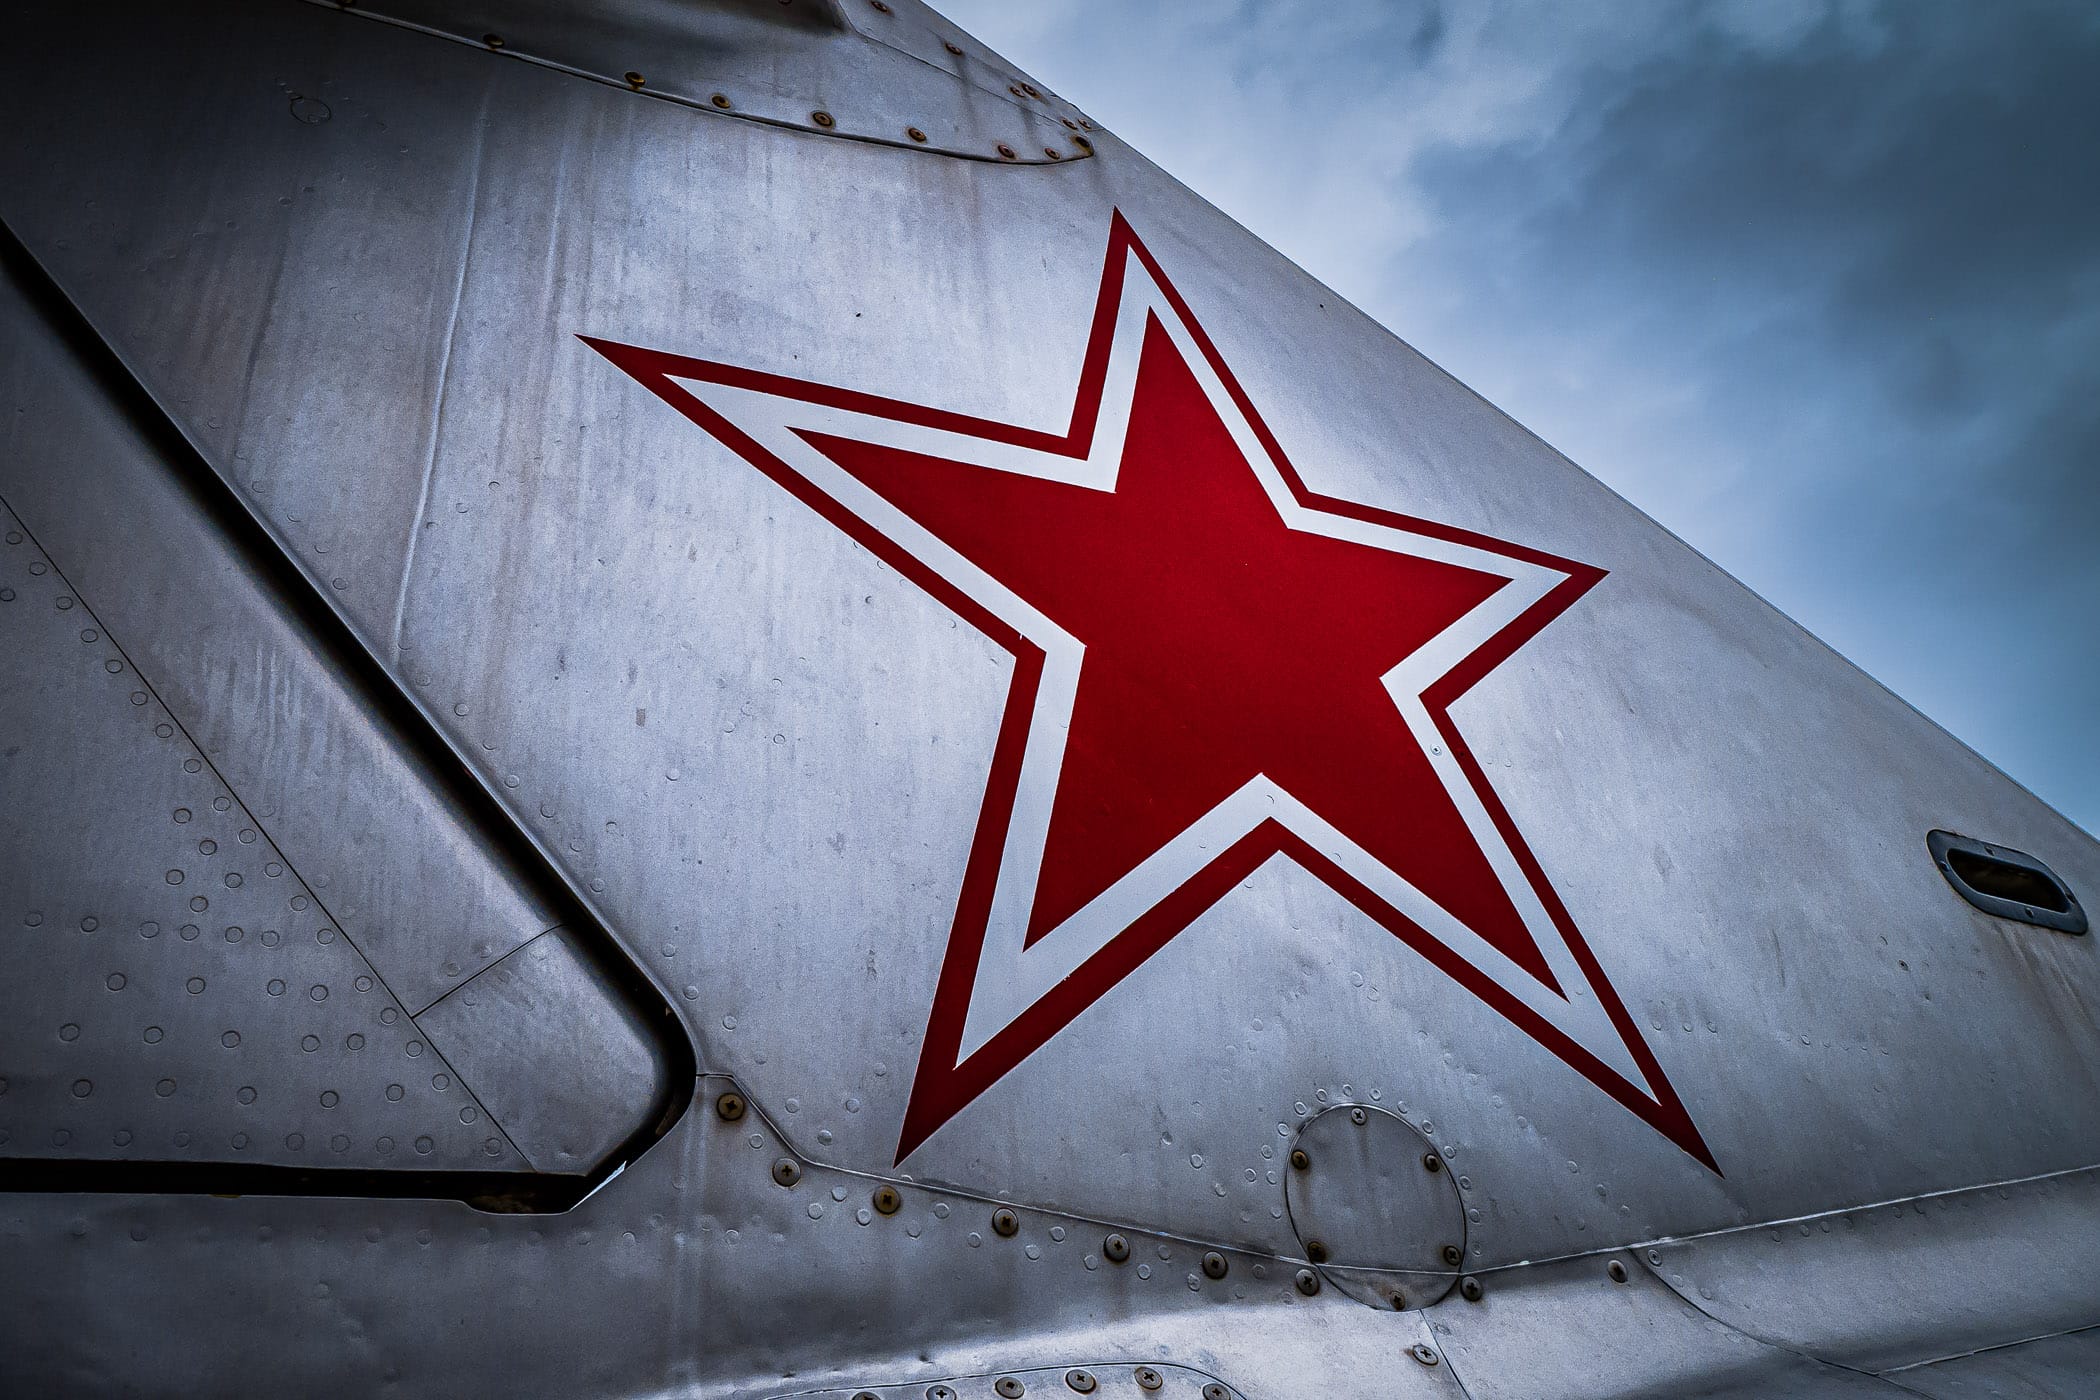 A Soviet-style red star on the tail of a former Polish Air Force MiG-17F in the collection of the Cavanaugh Flight Museum, Addison, Texas.